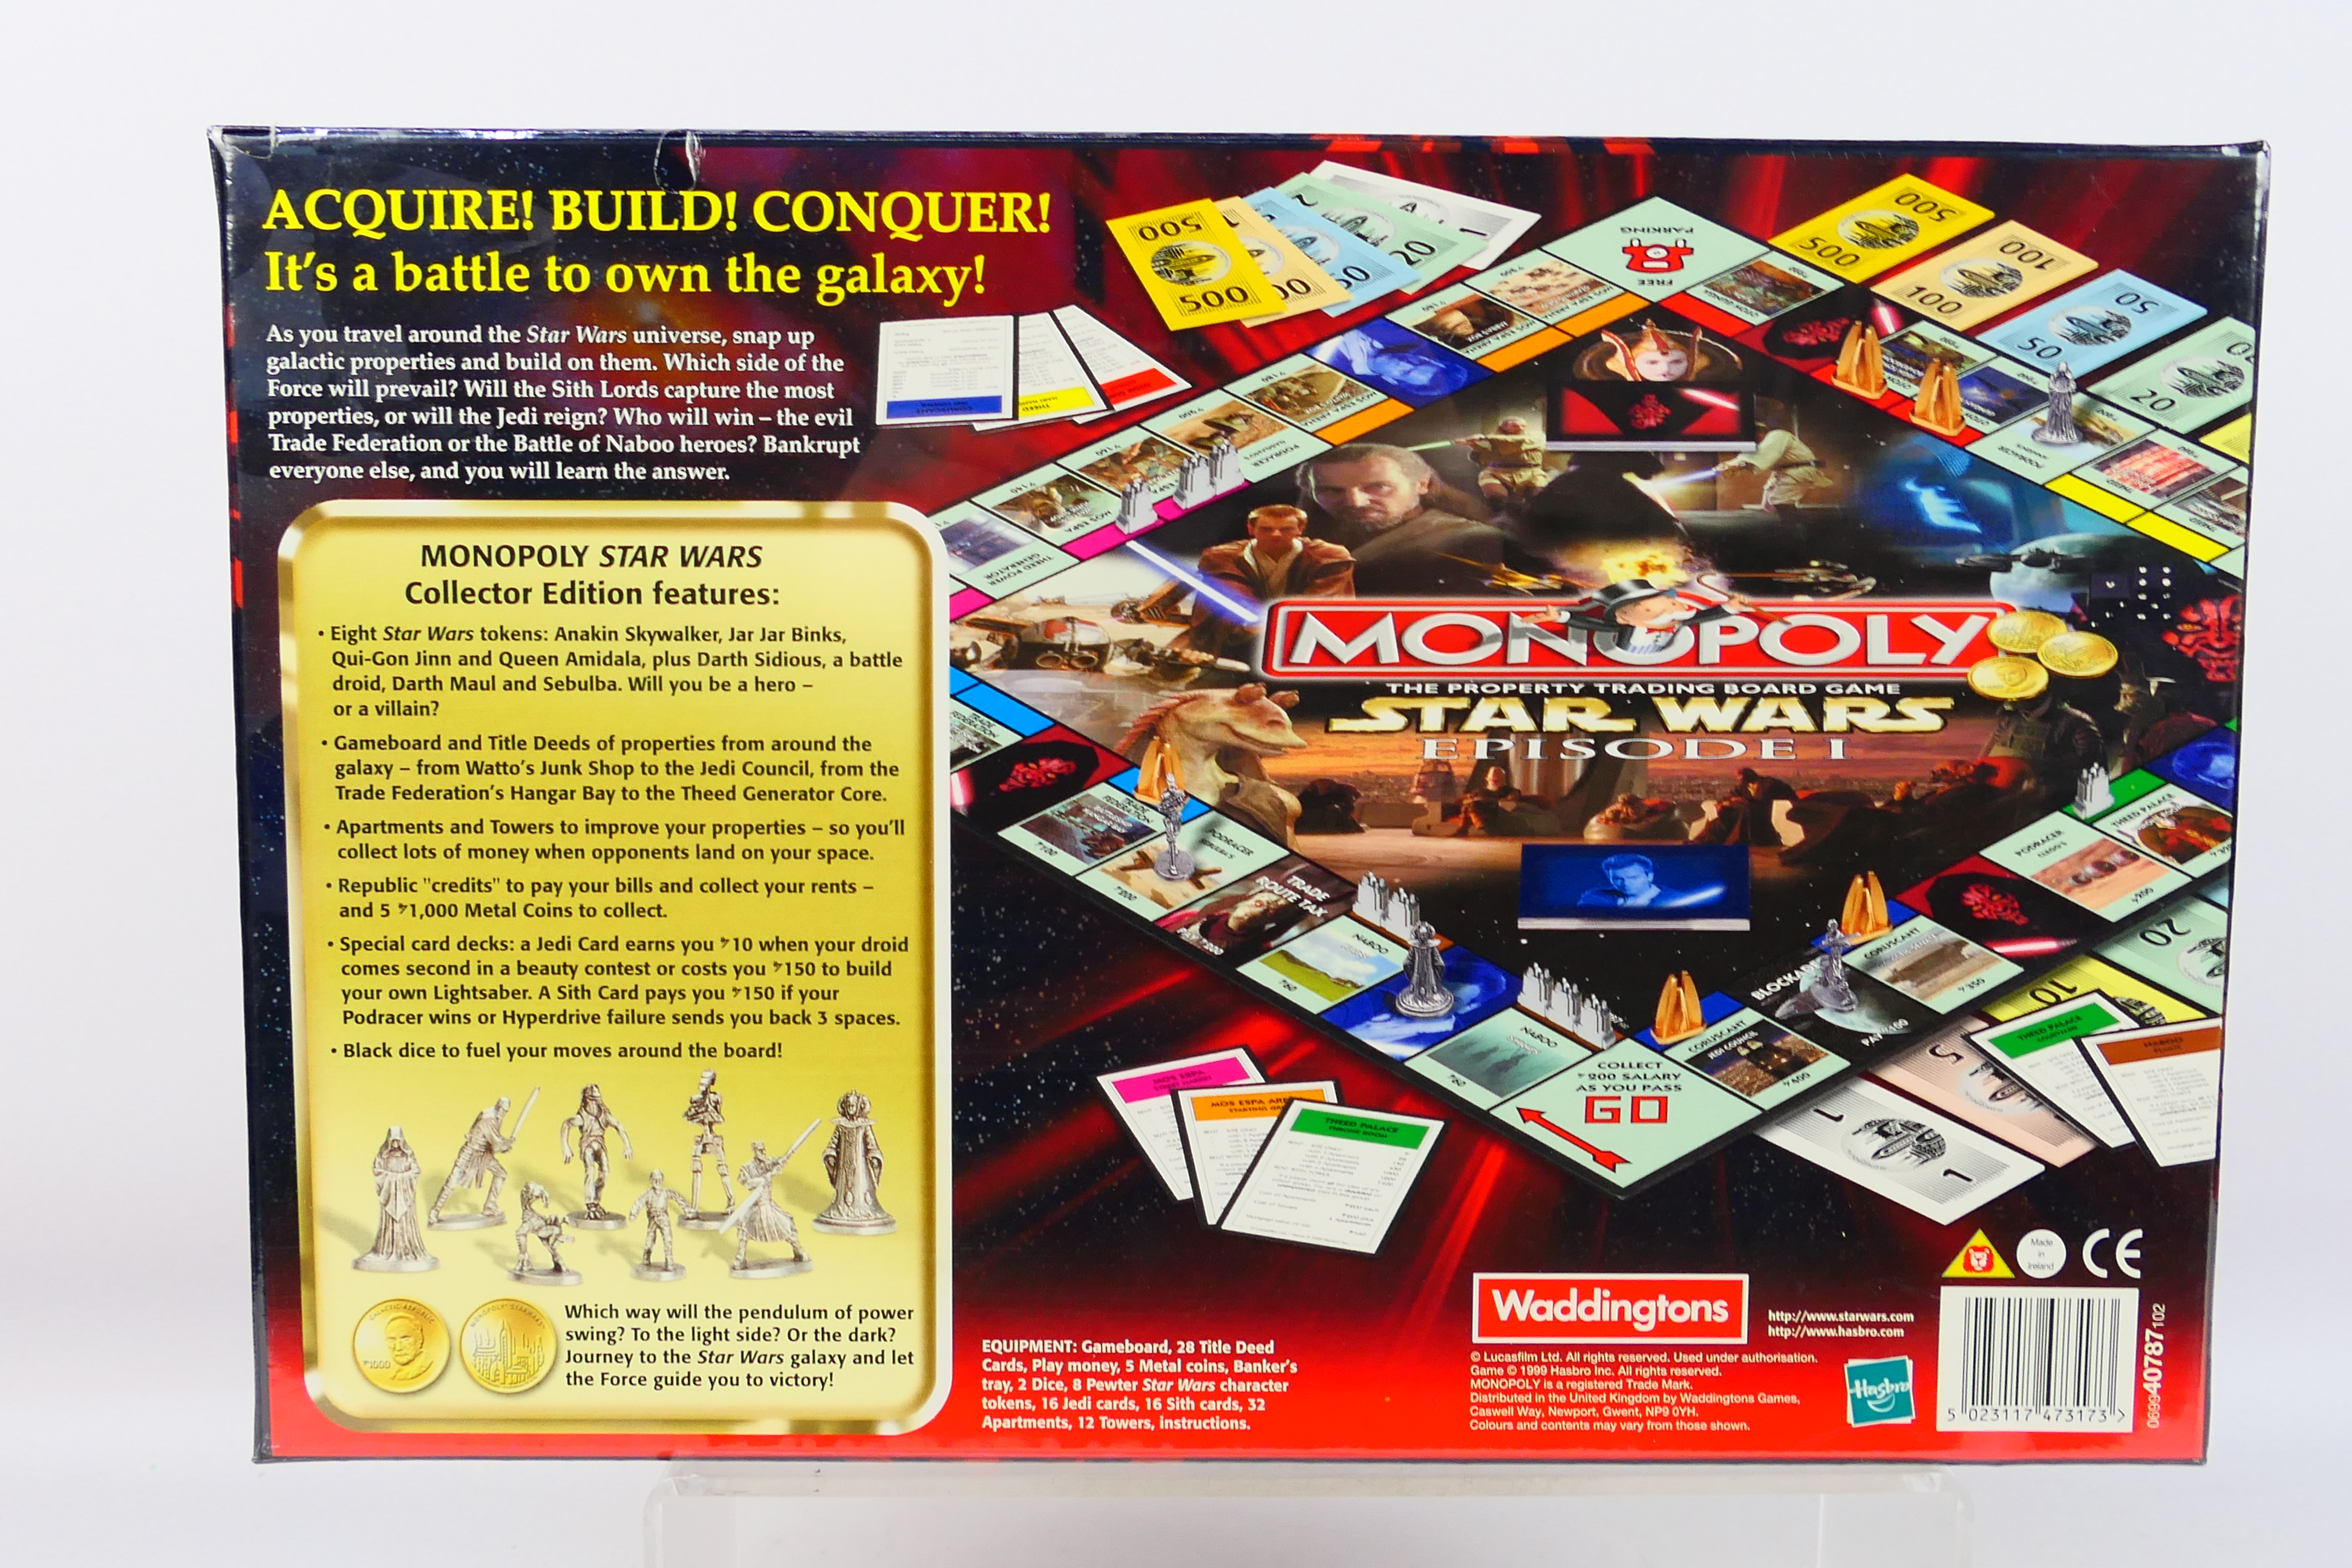 Hasbro - Monopoly - An Star Wars Episode - Image 2 of 3